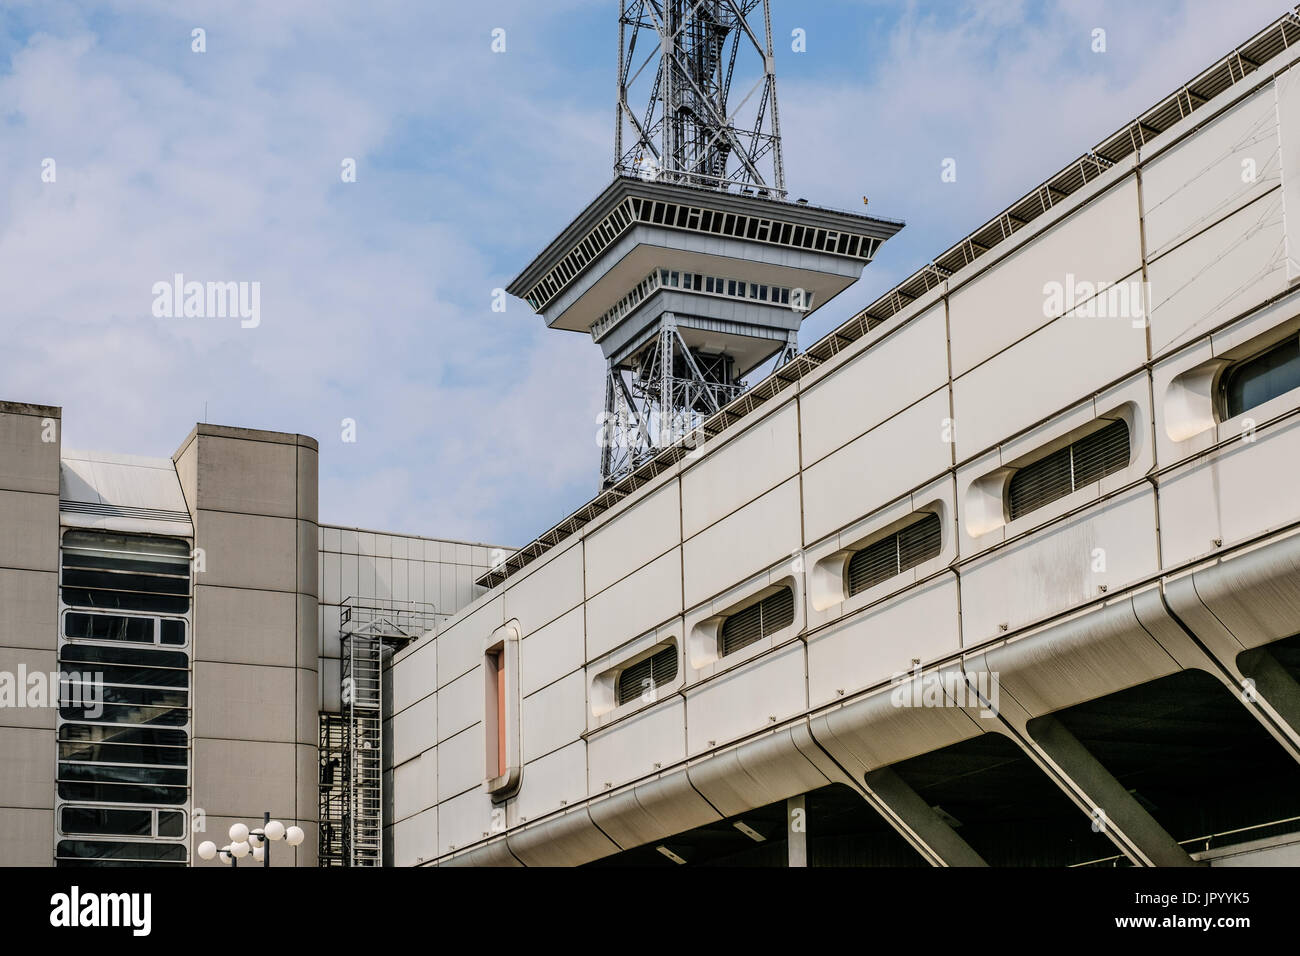 Berlin, Germany - August 02, 2017: The Funkturm (Radio Tower) and the International Congress Center (ICC)  in Berlin , Germany Stock Photo